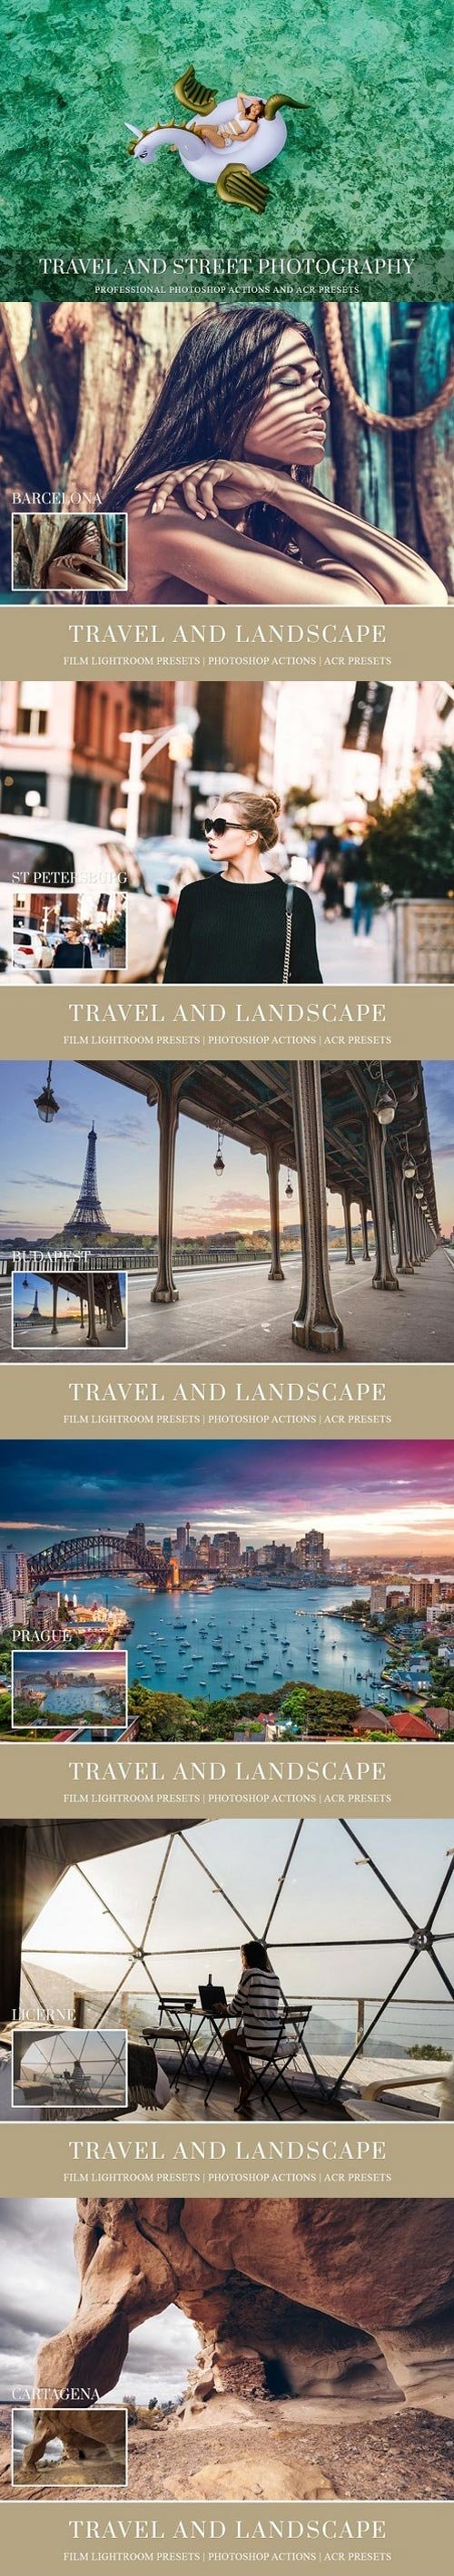 Travel Photoshop actions ACR presets 1503285